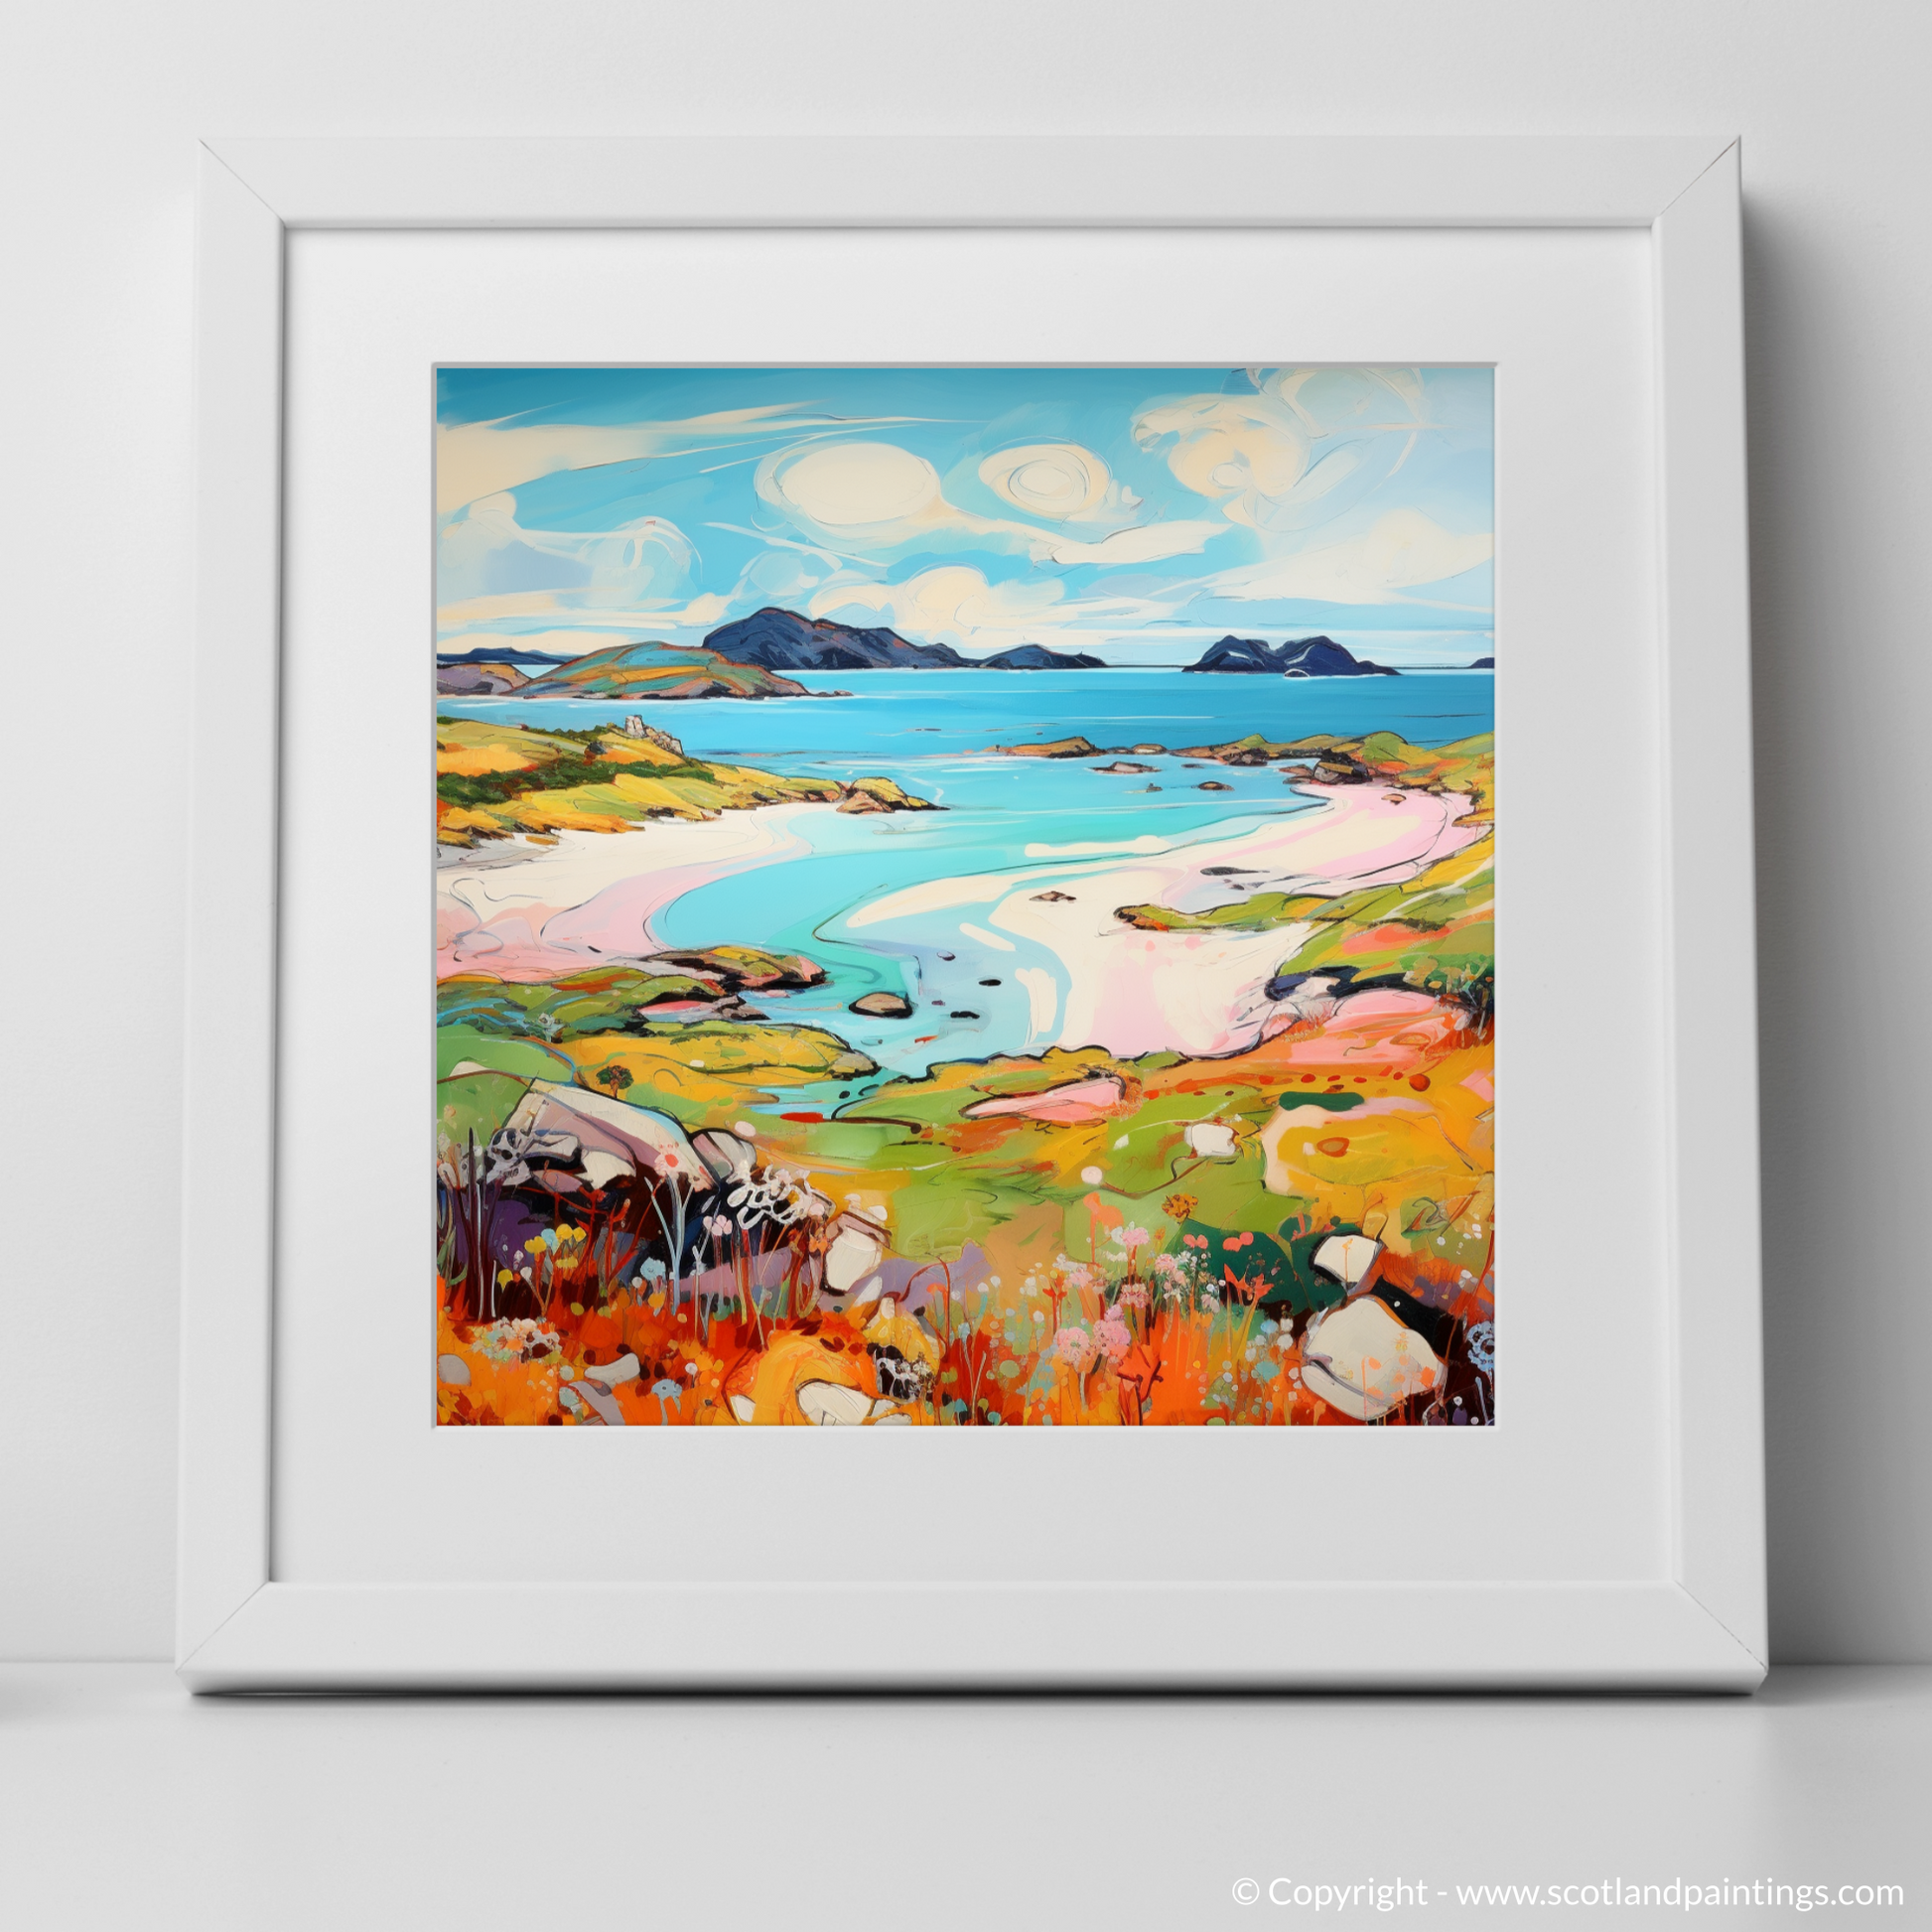 Art Print of Kiloran Bay, Isle of Colonsay in summer with a white frame